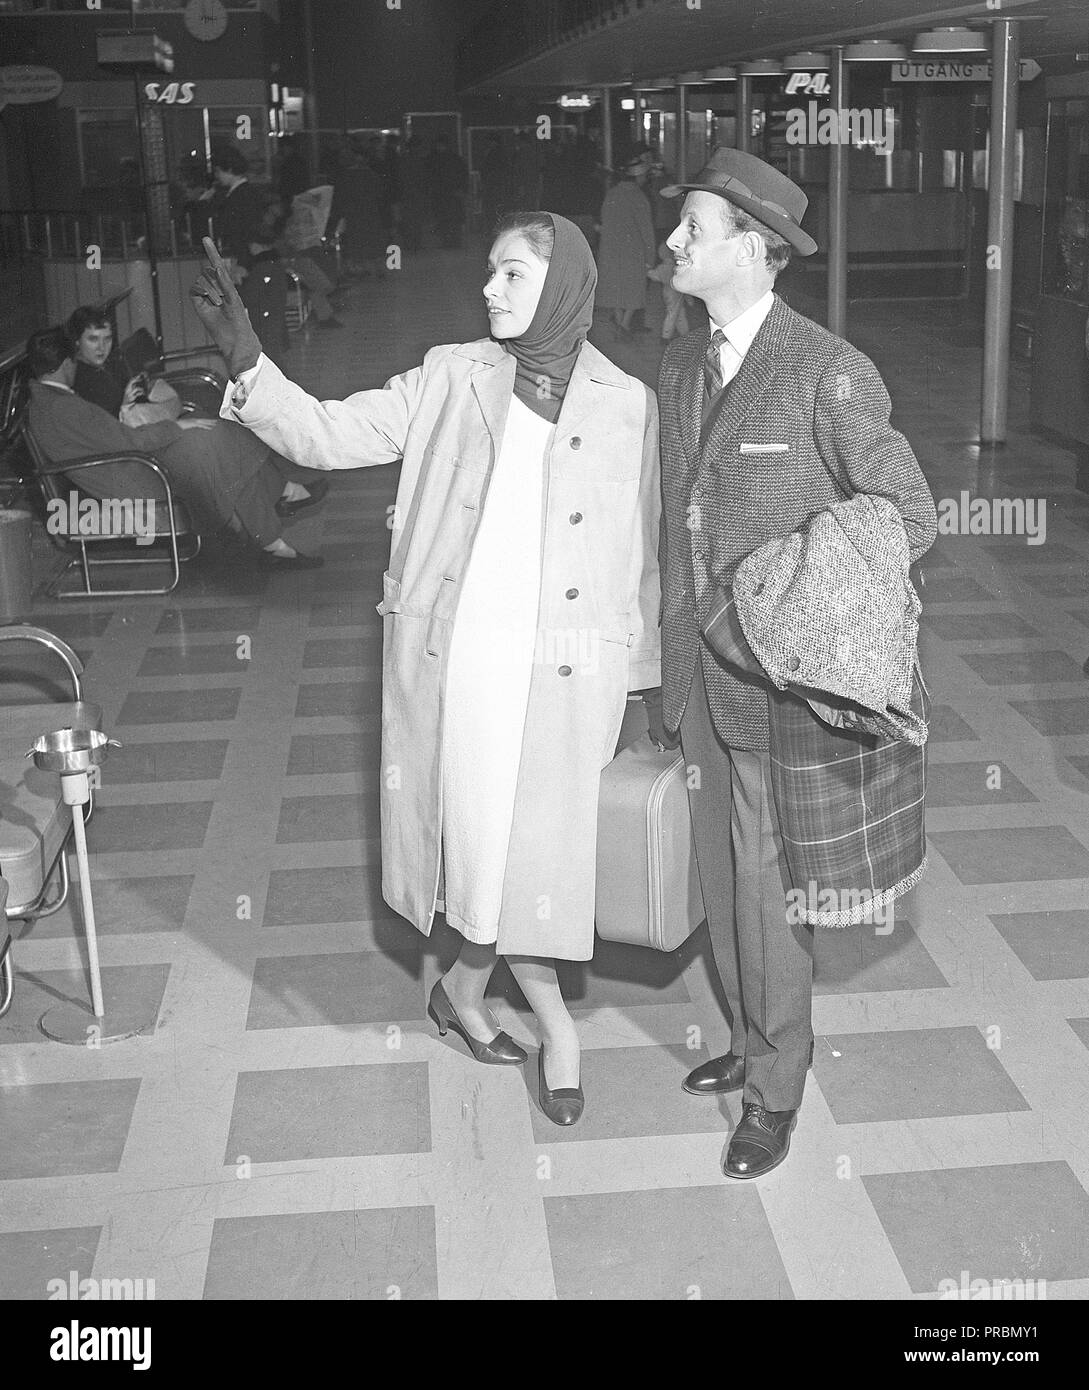 Couple in the 1950s. A young couple in an airport, ready for their holiday trip, carrying their luggage in the departure terminal. She is pointing at something in the terminal, perhaps she has found the boarding gate or the departure time on a sign.  Sweden 1956. Photo Kristoffersson Ref CB15-9 Stock Photo